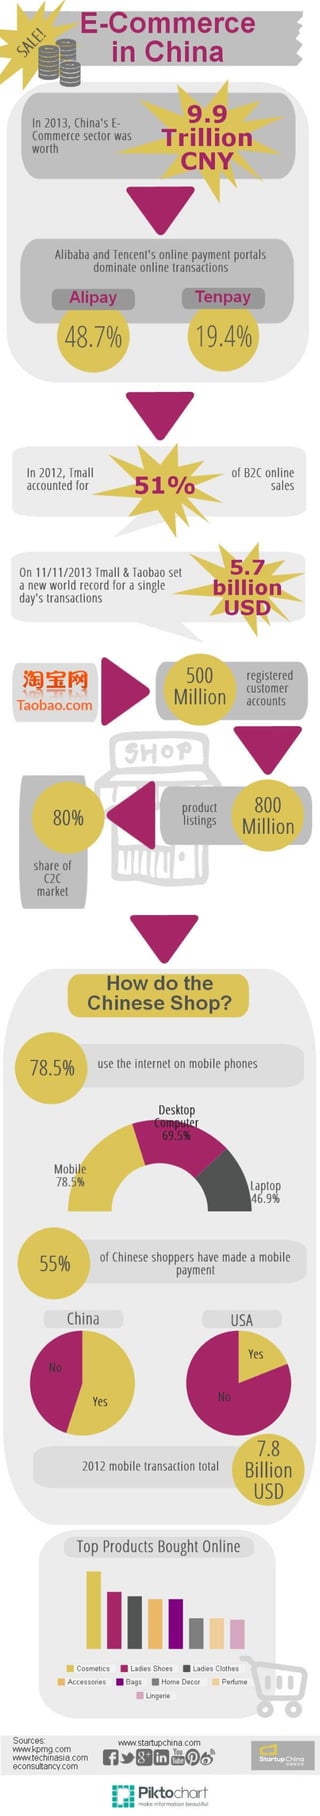 E-Commerce in China